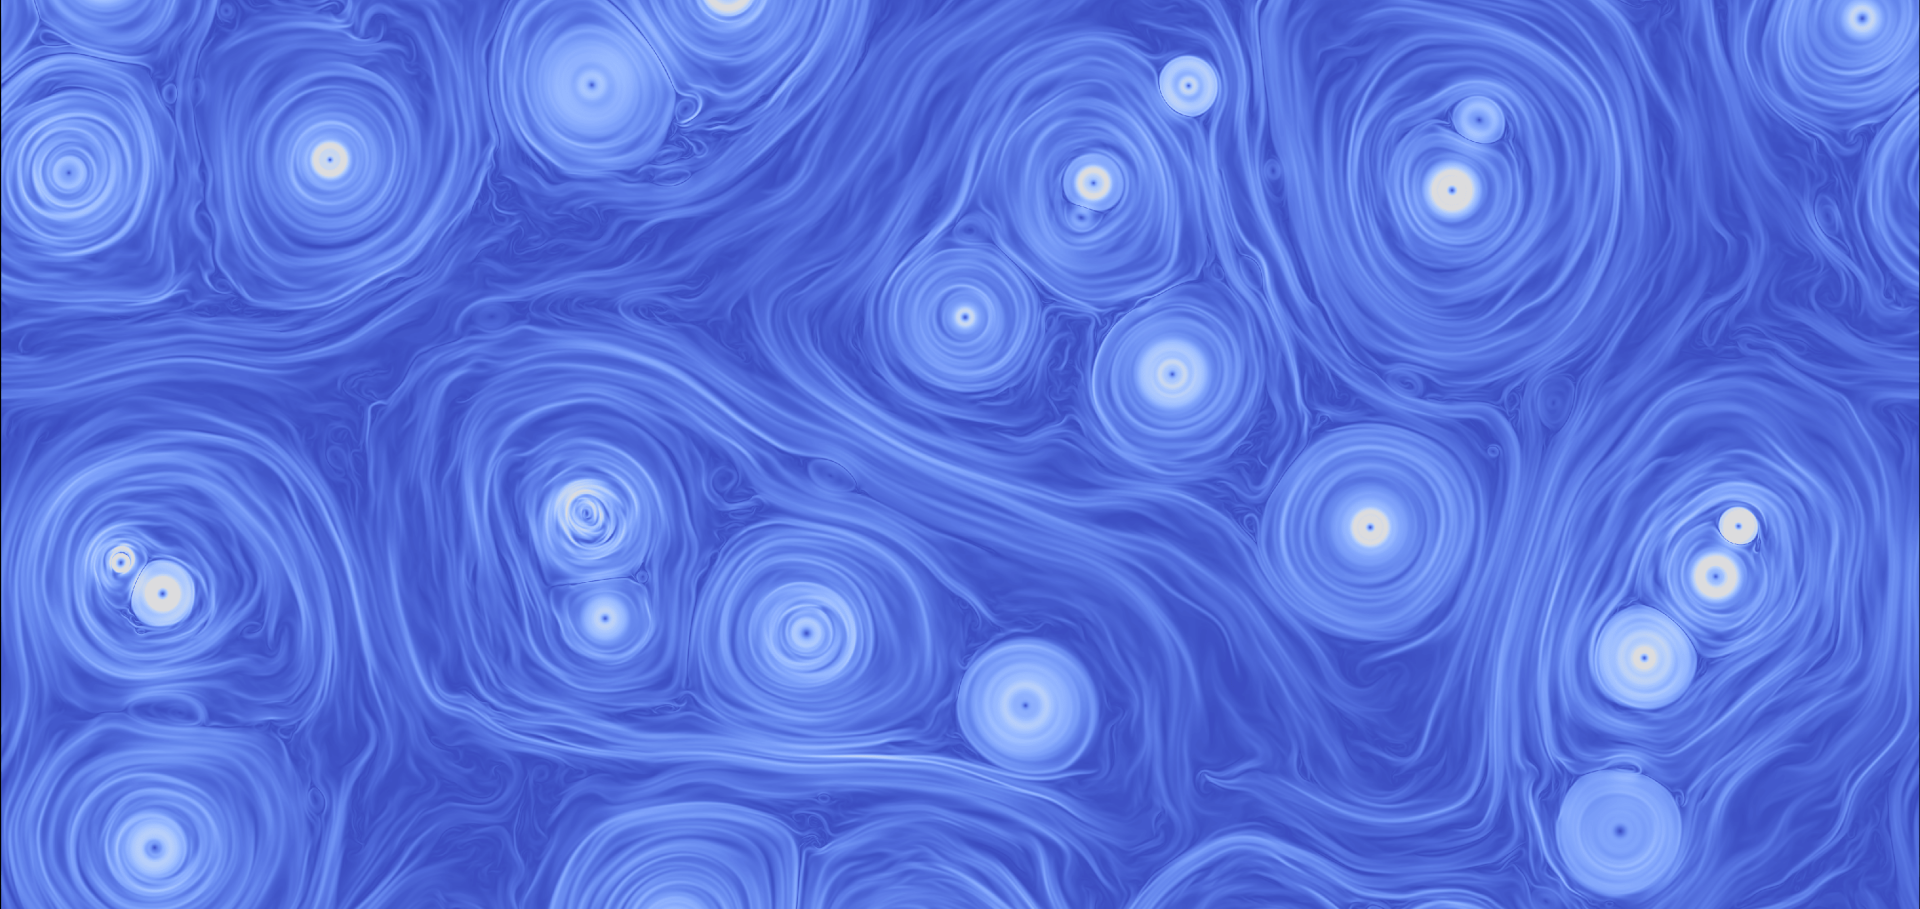 Decaying magnetohydrodynamic turbulence in two dimensions.